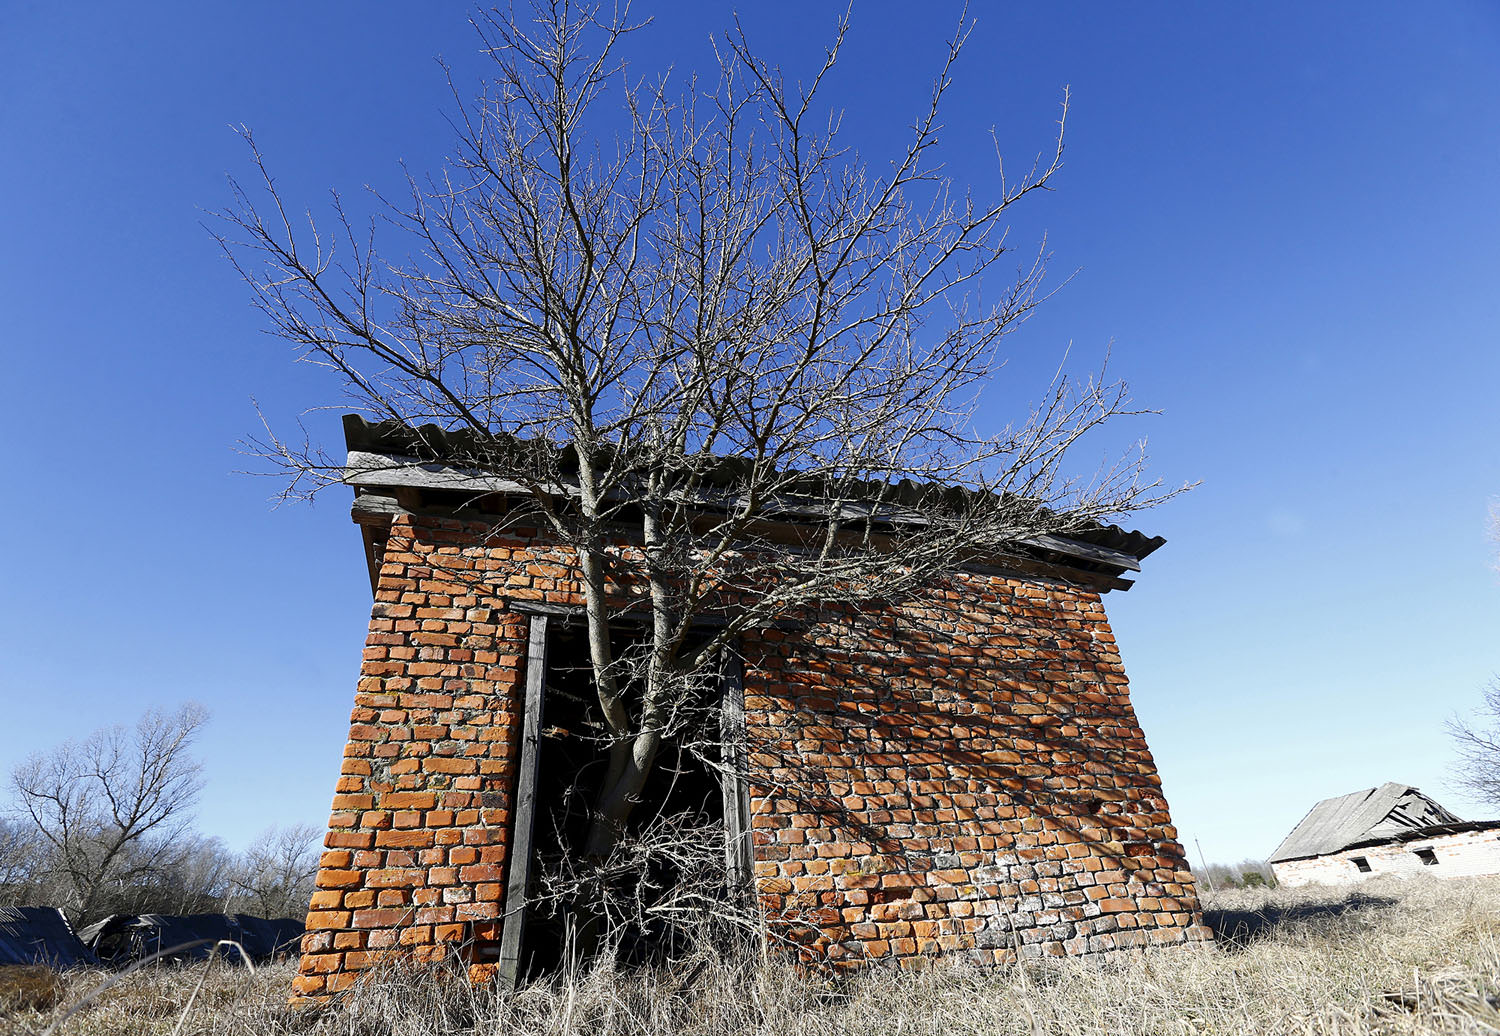 chernobyl tree growing out of barn